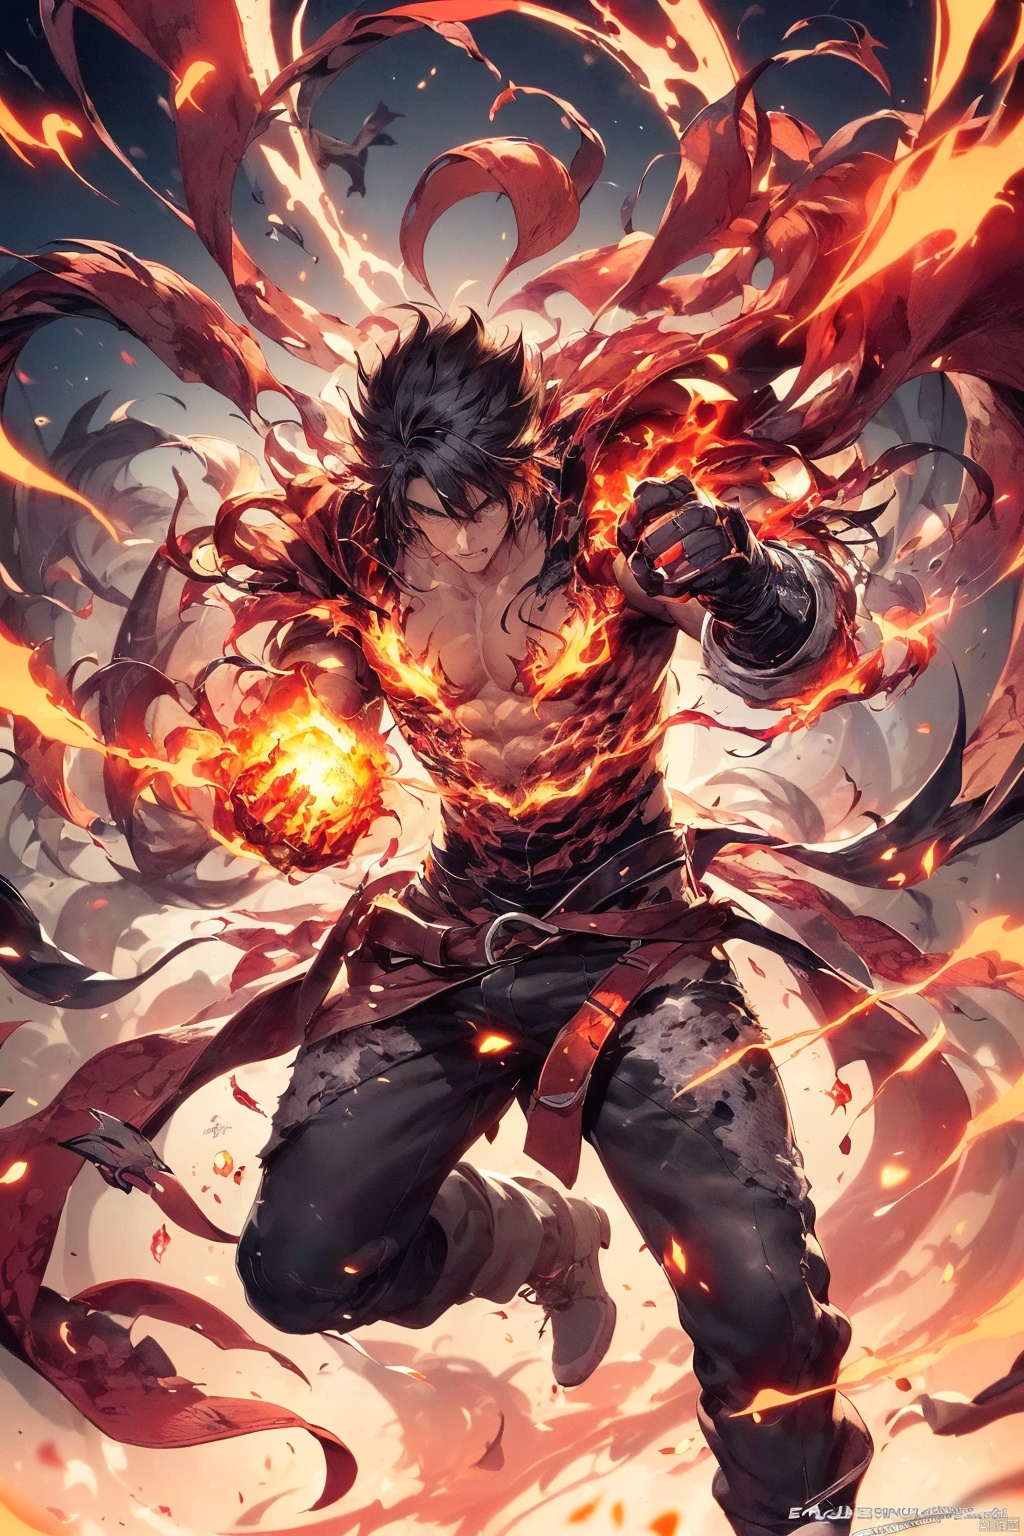 
a close up of a person holding a fire ball in their hand, an anime drawing by Yang J, pixiv contest winner, shin hanga, an epic anime of a energy man, fire!! full body, badass anime 8 k, fire powers, fire behind him, 4 k manga wallpaper, anime epic artwork, human and dragon fusion, handsome guy in demon slayer art